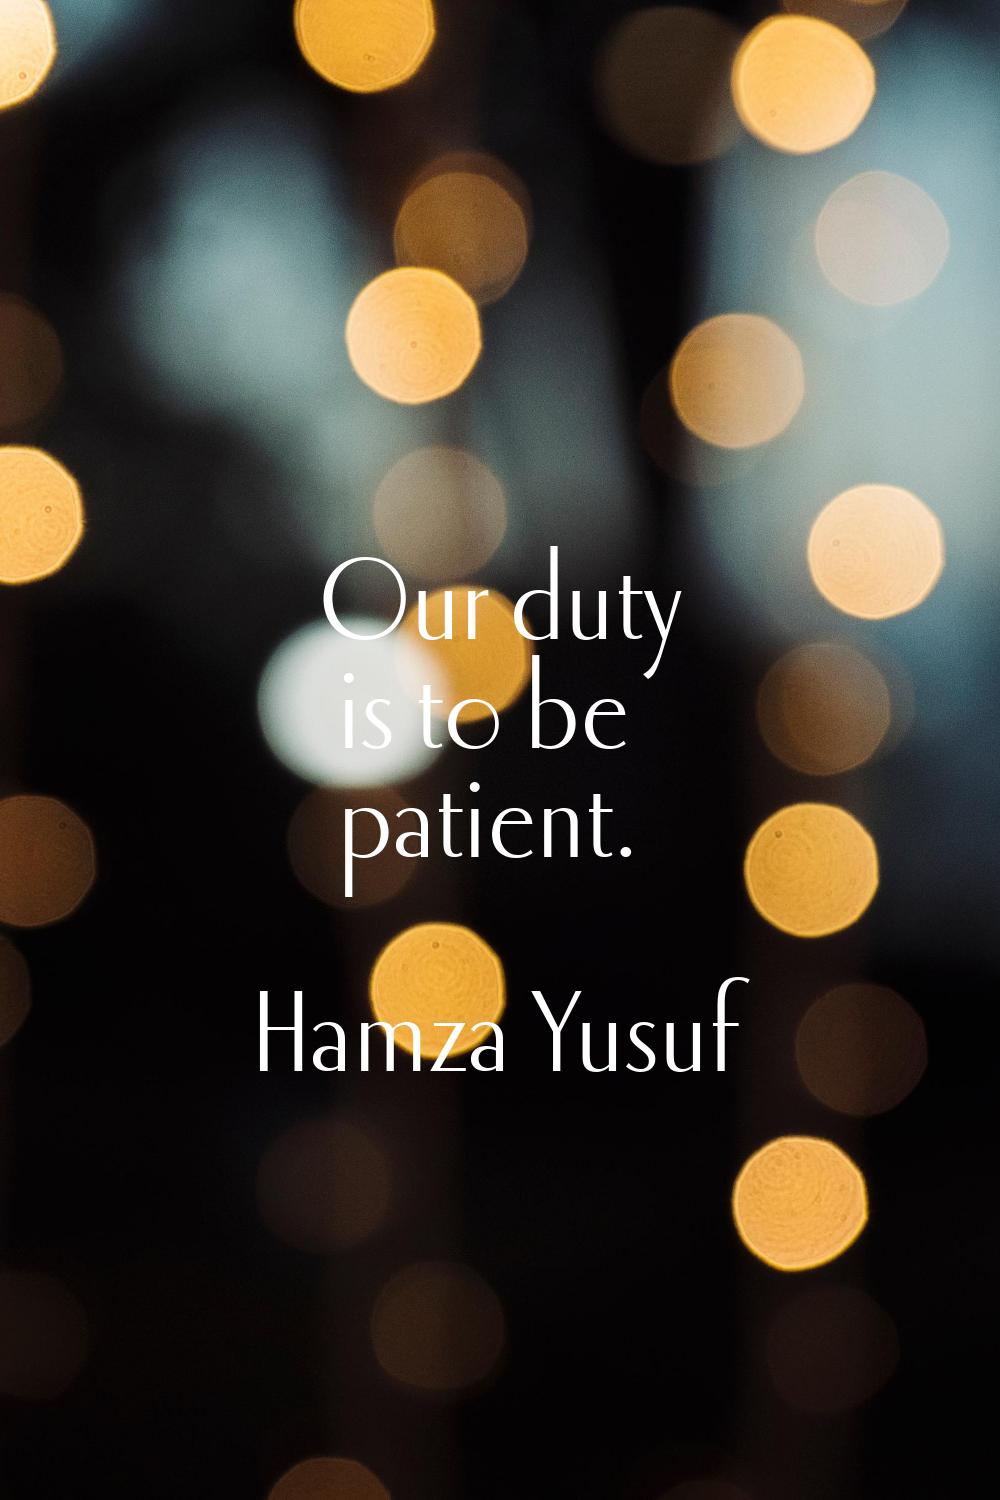 Our duty is to be patient.